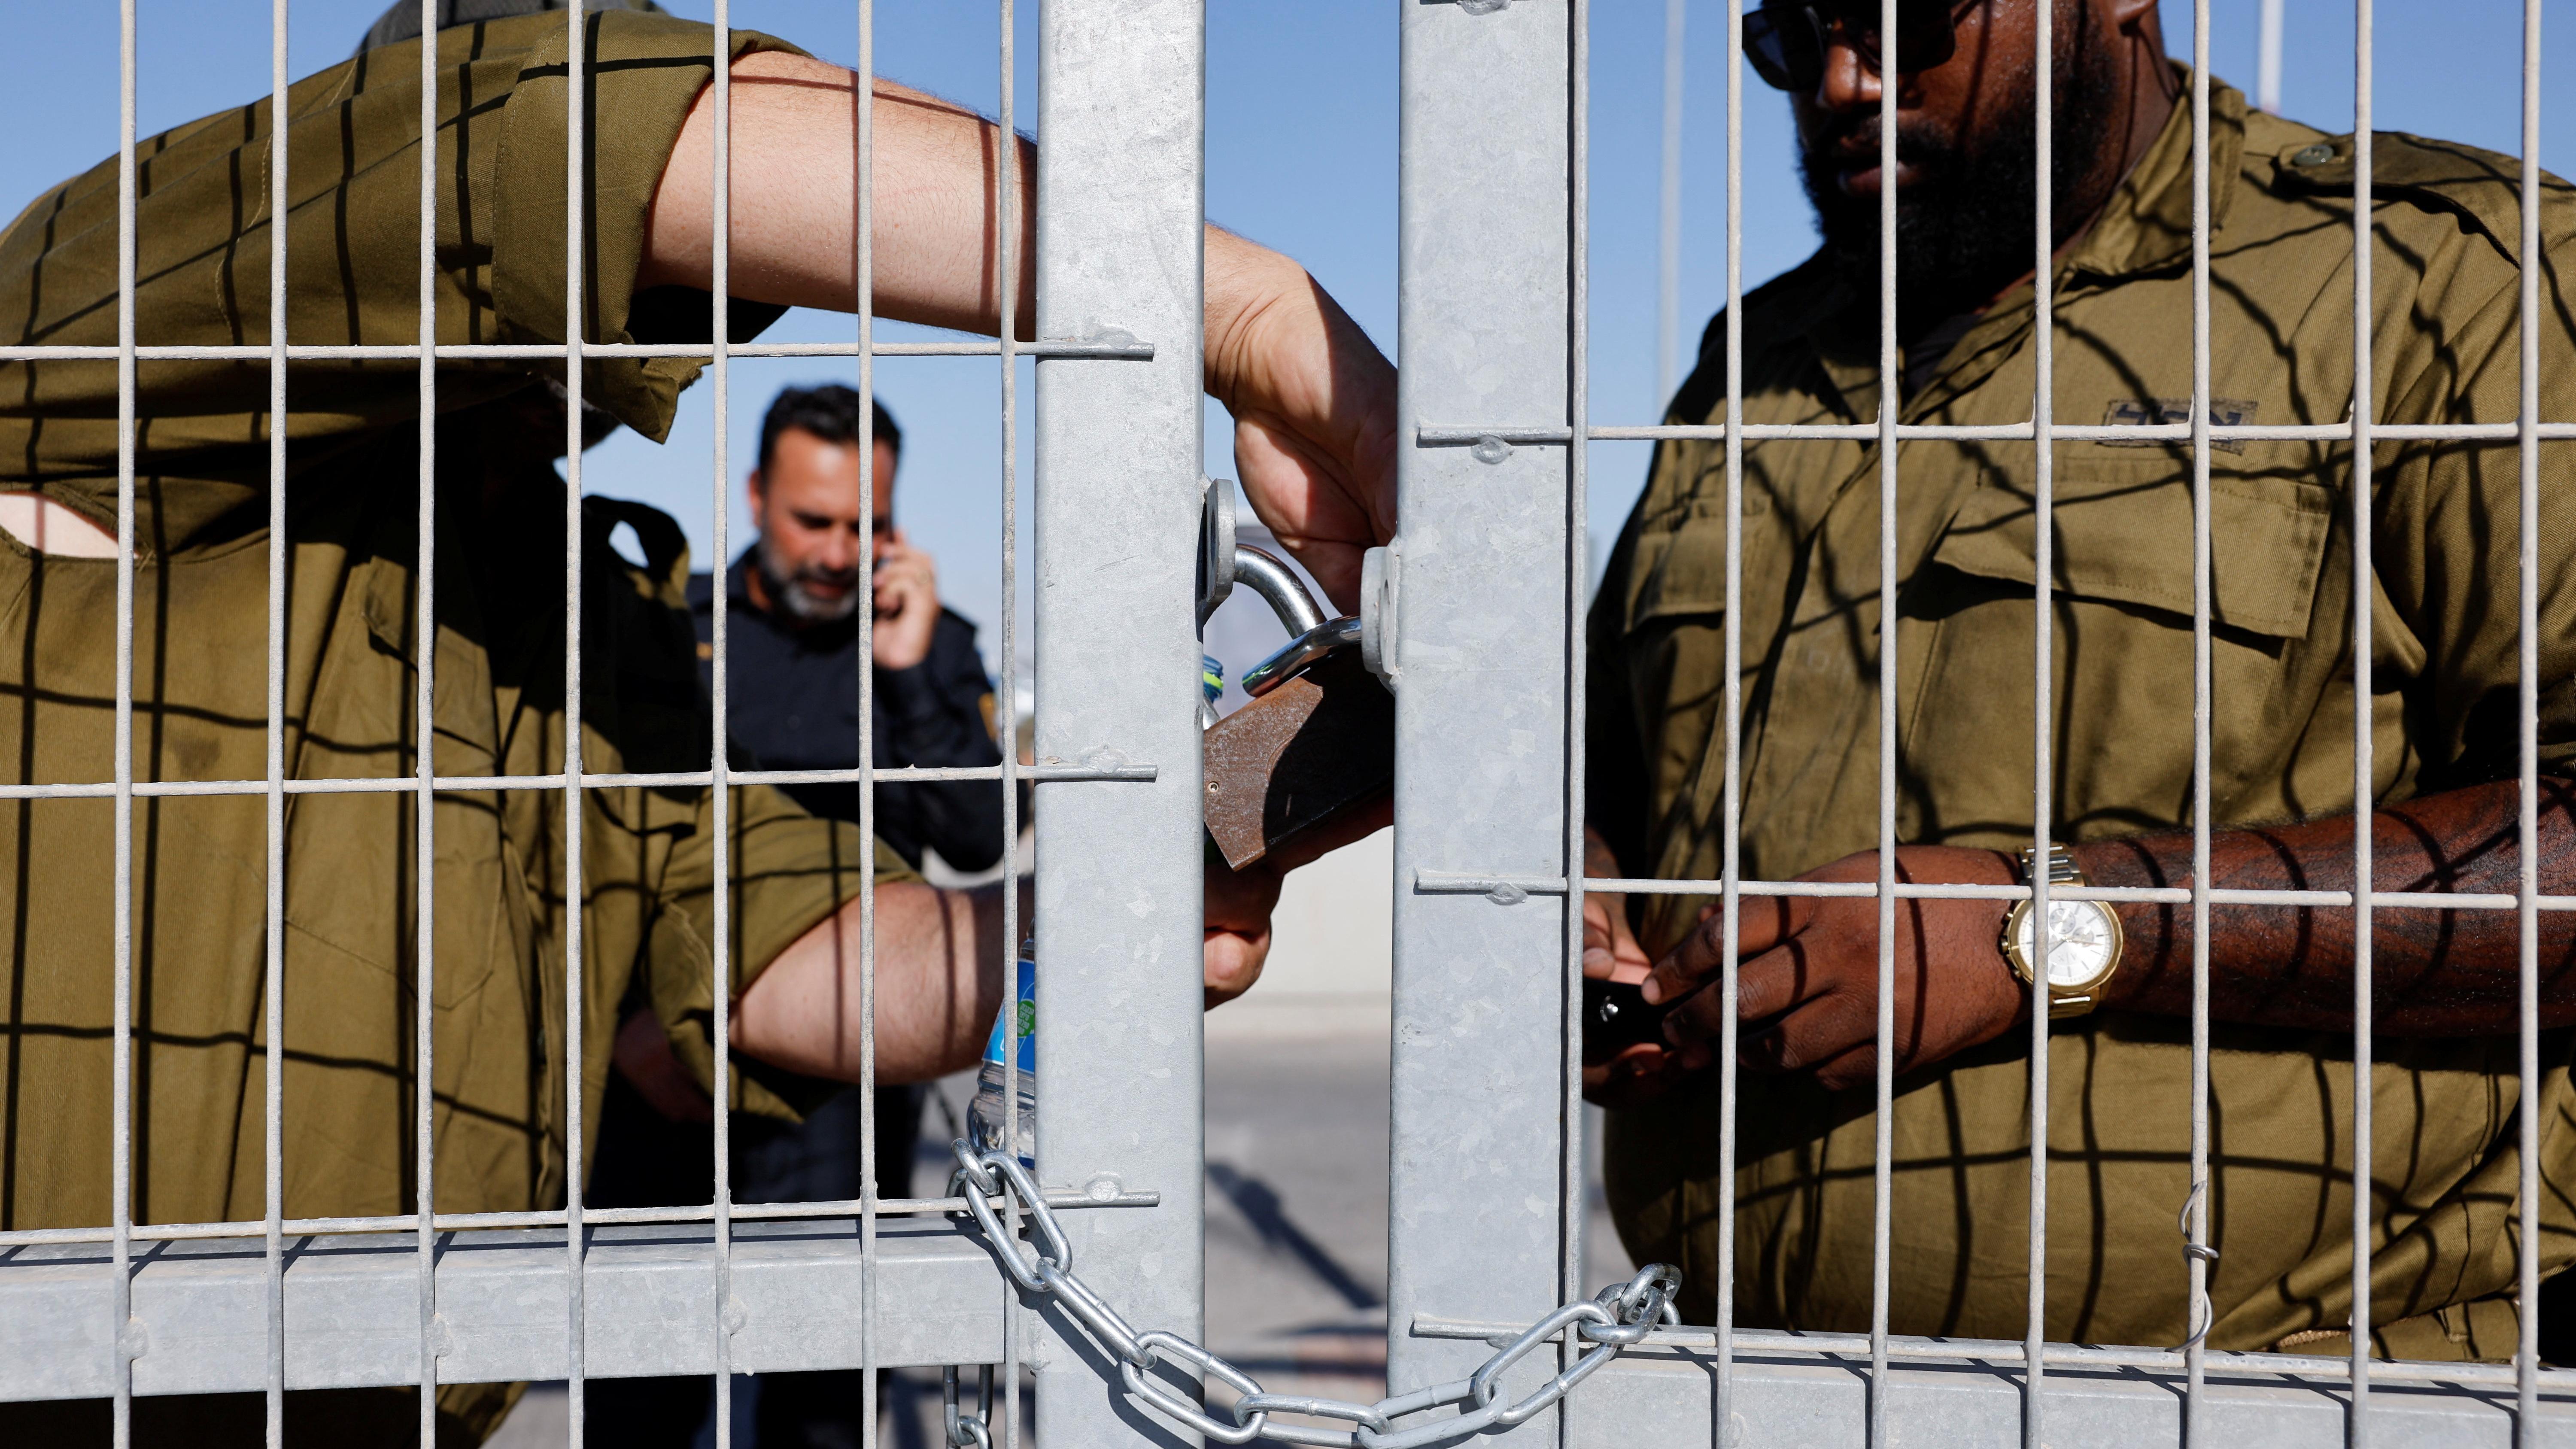 Israel may have tortured Palestinian prisoners - UN